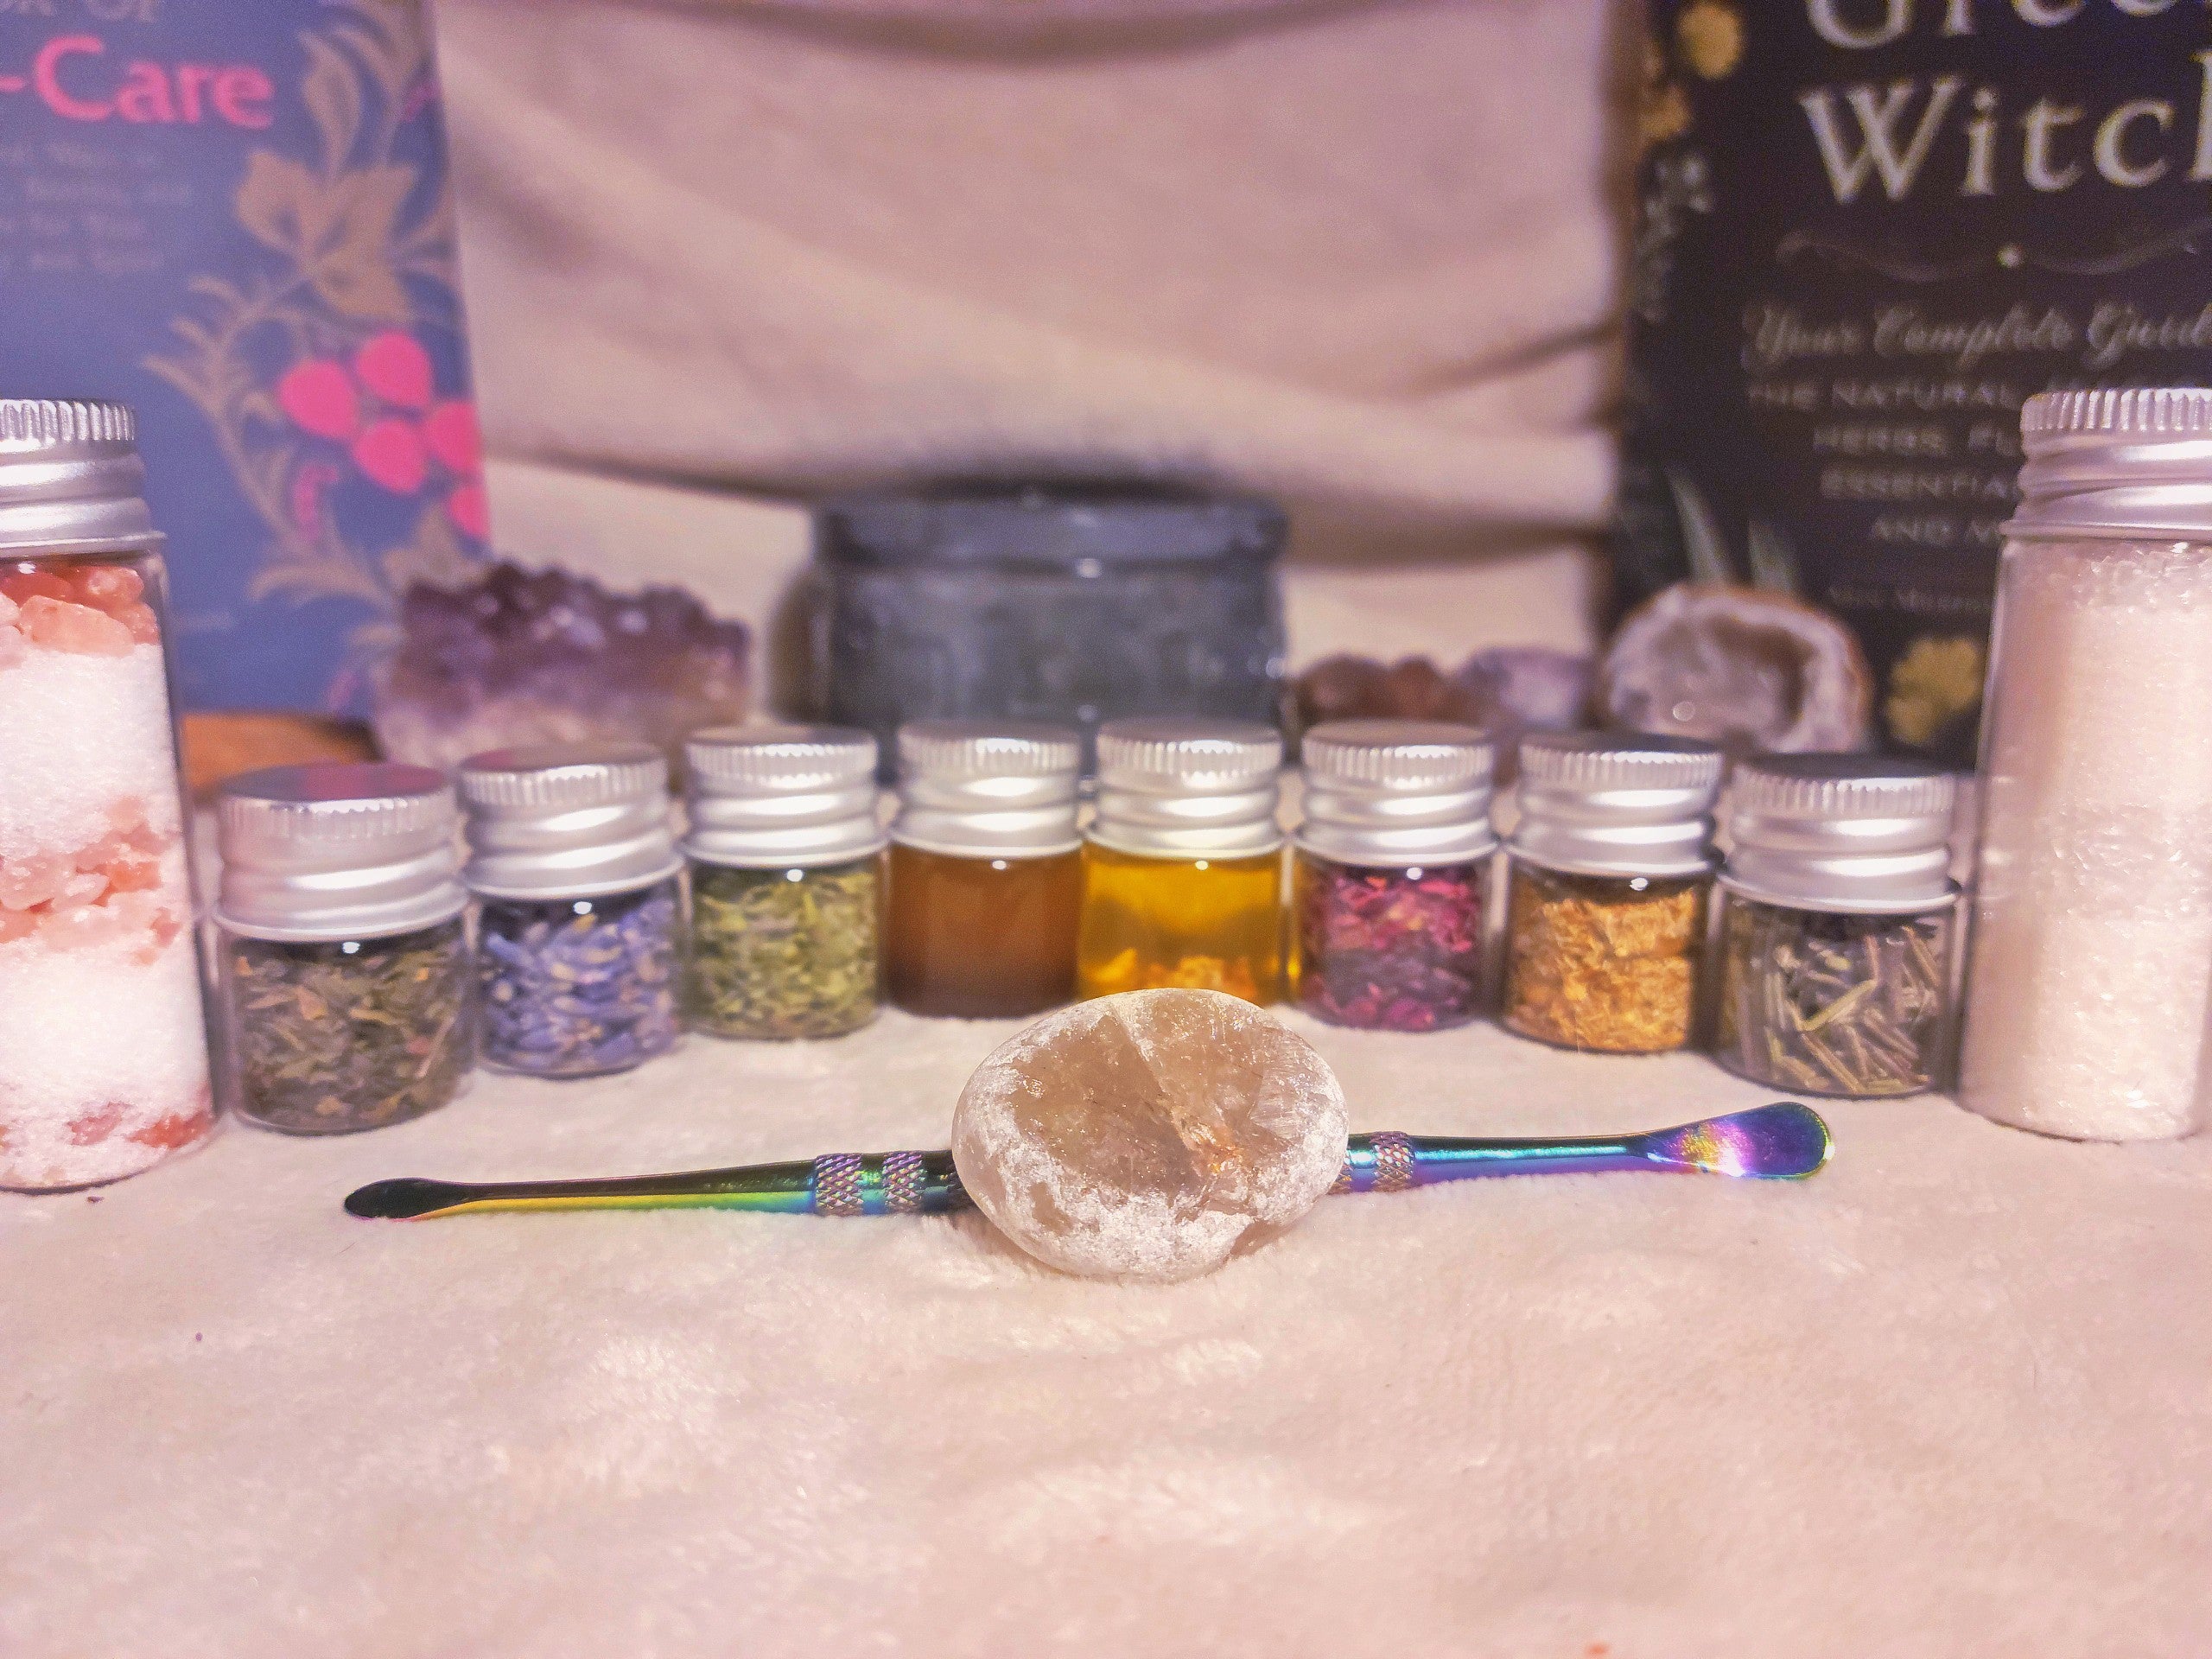 Candle Spell Kit